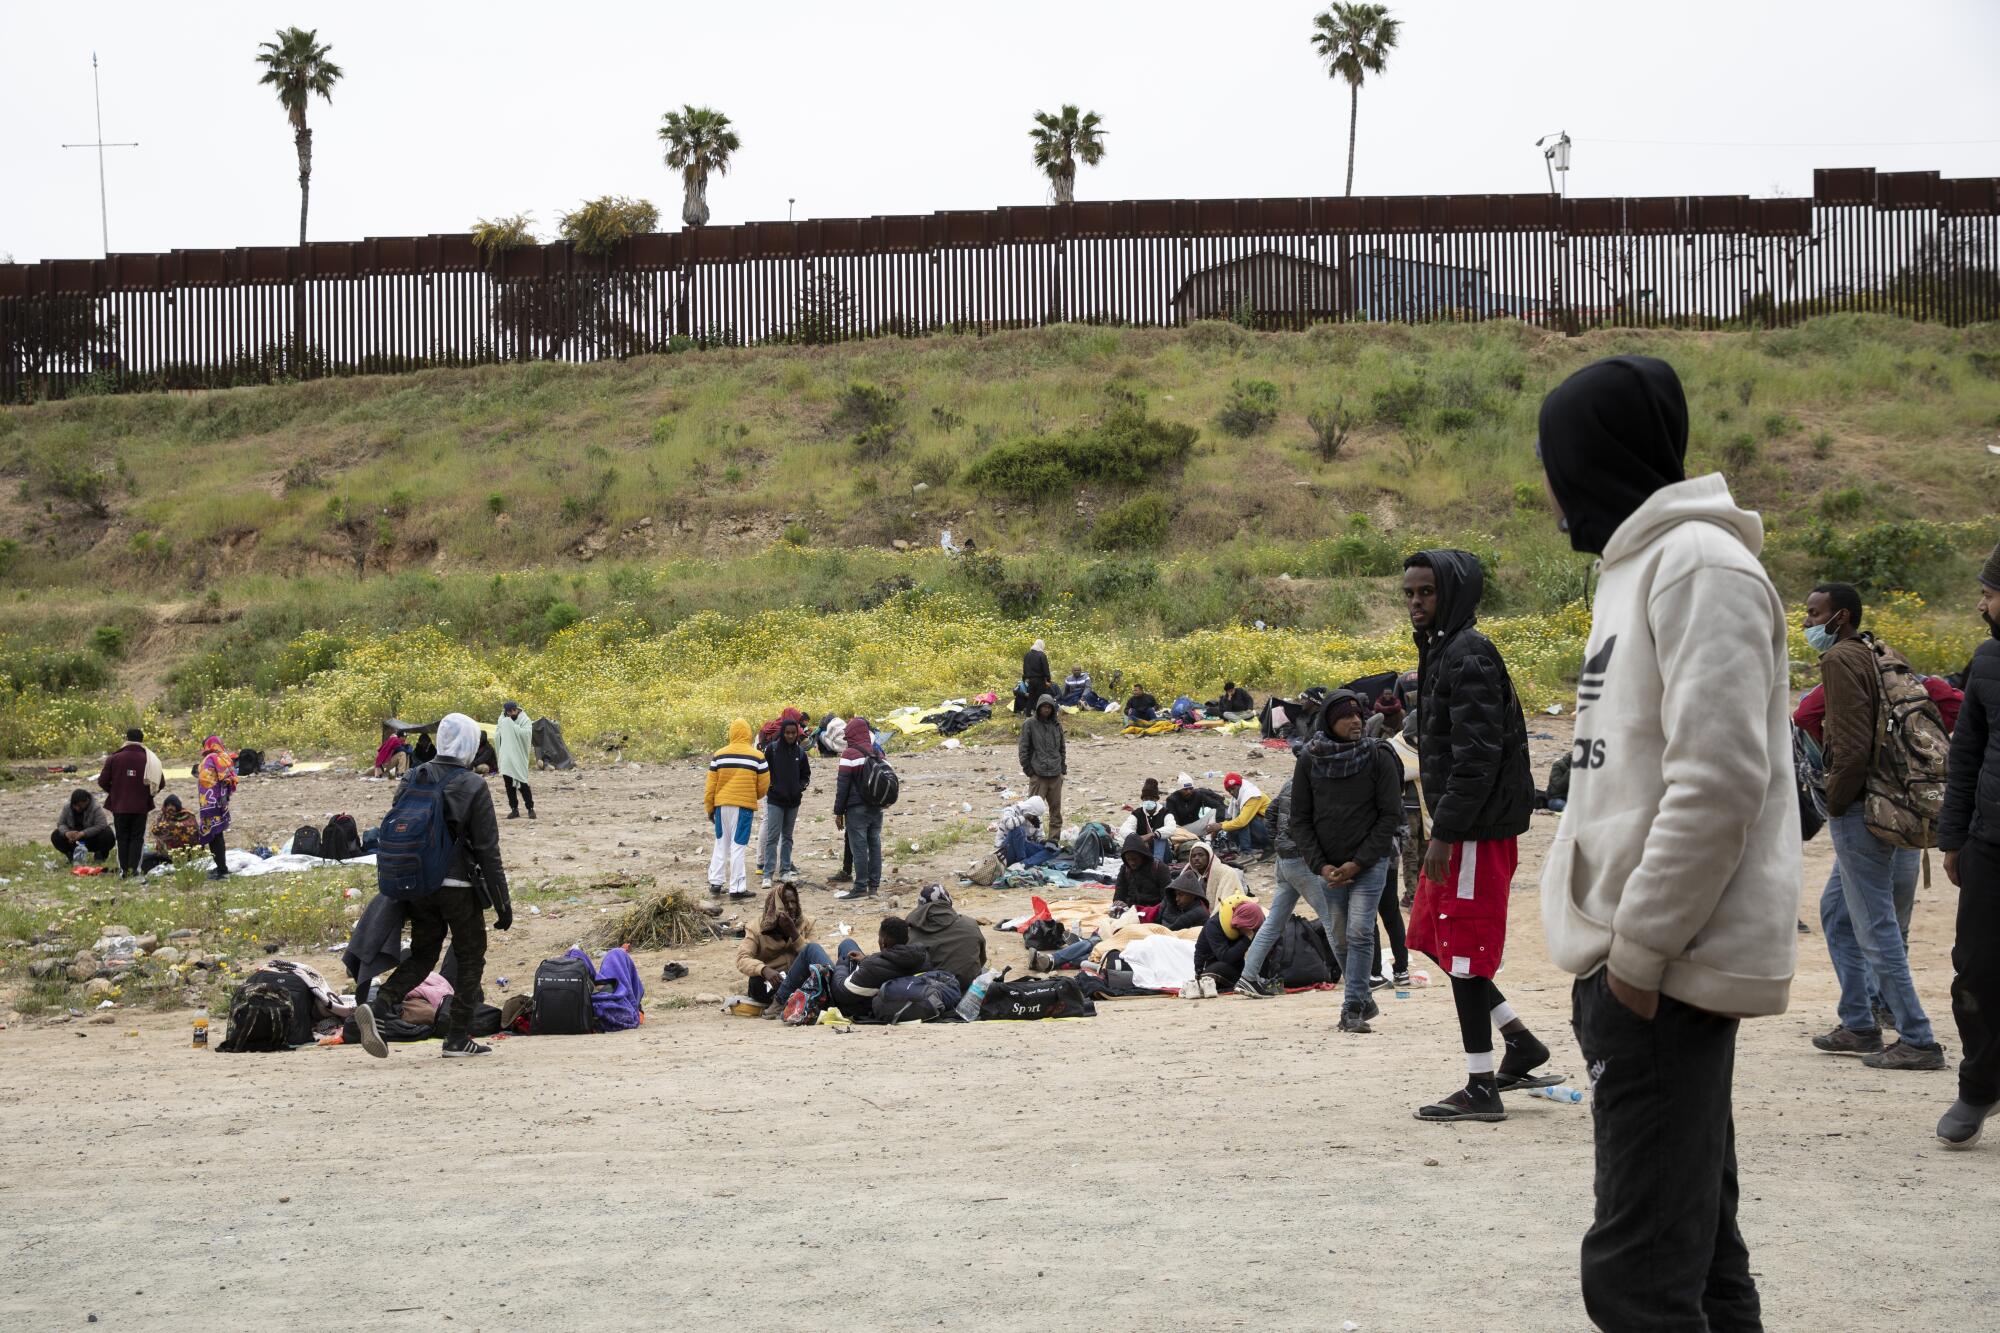 More than a hundred asylum seekers from various countries wait in Border Patrol custody to be taken for processing.